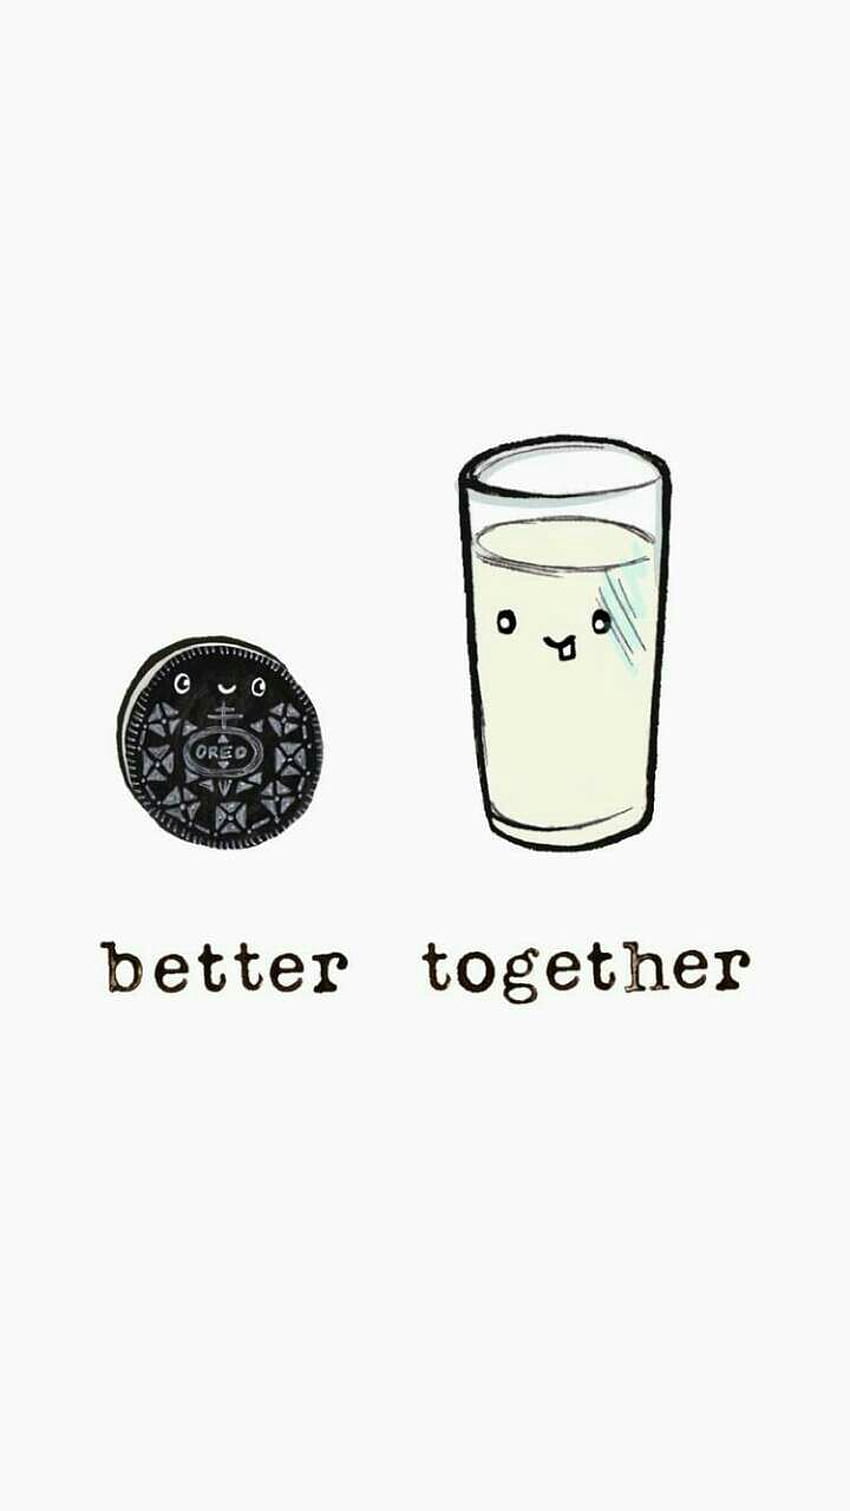 A cartoon of an oatmeal cookie and glass with the words better together - Oreo